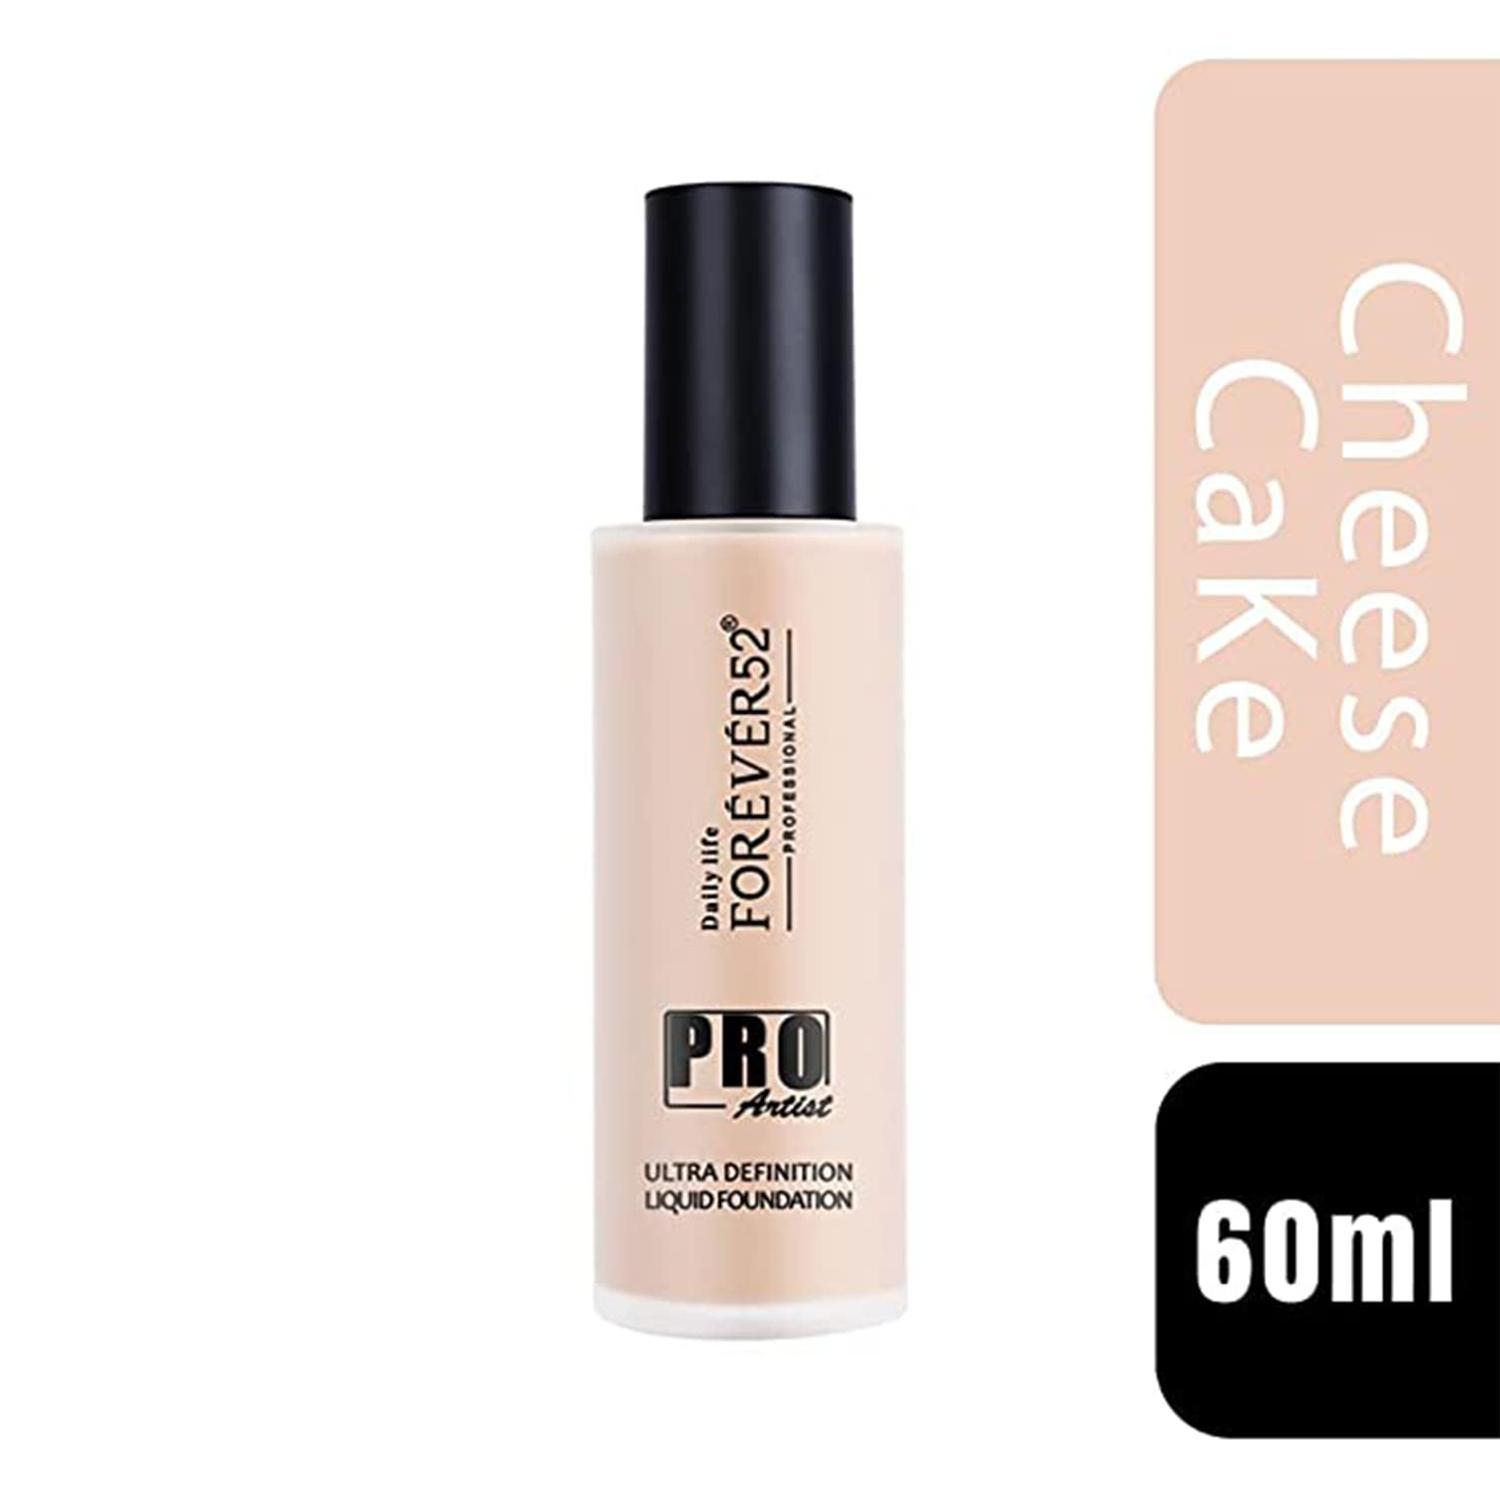 daily life forever52 pro artist ultra definition liquid foundation buf001 - cheese cake (60ml)